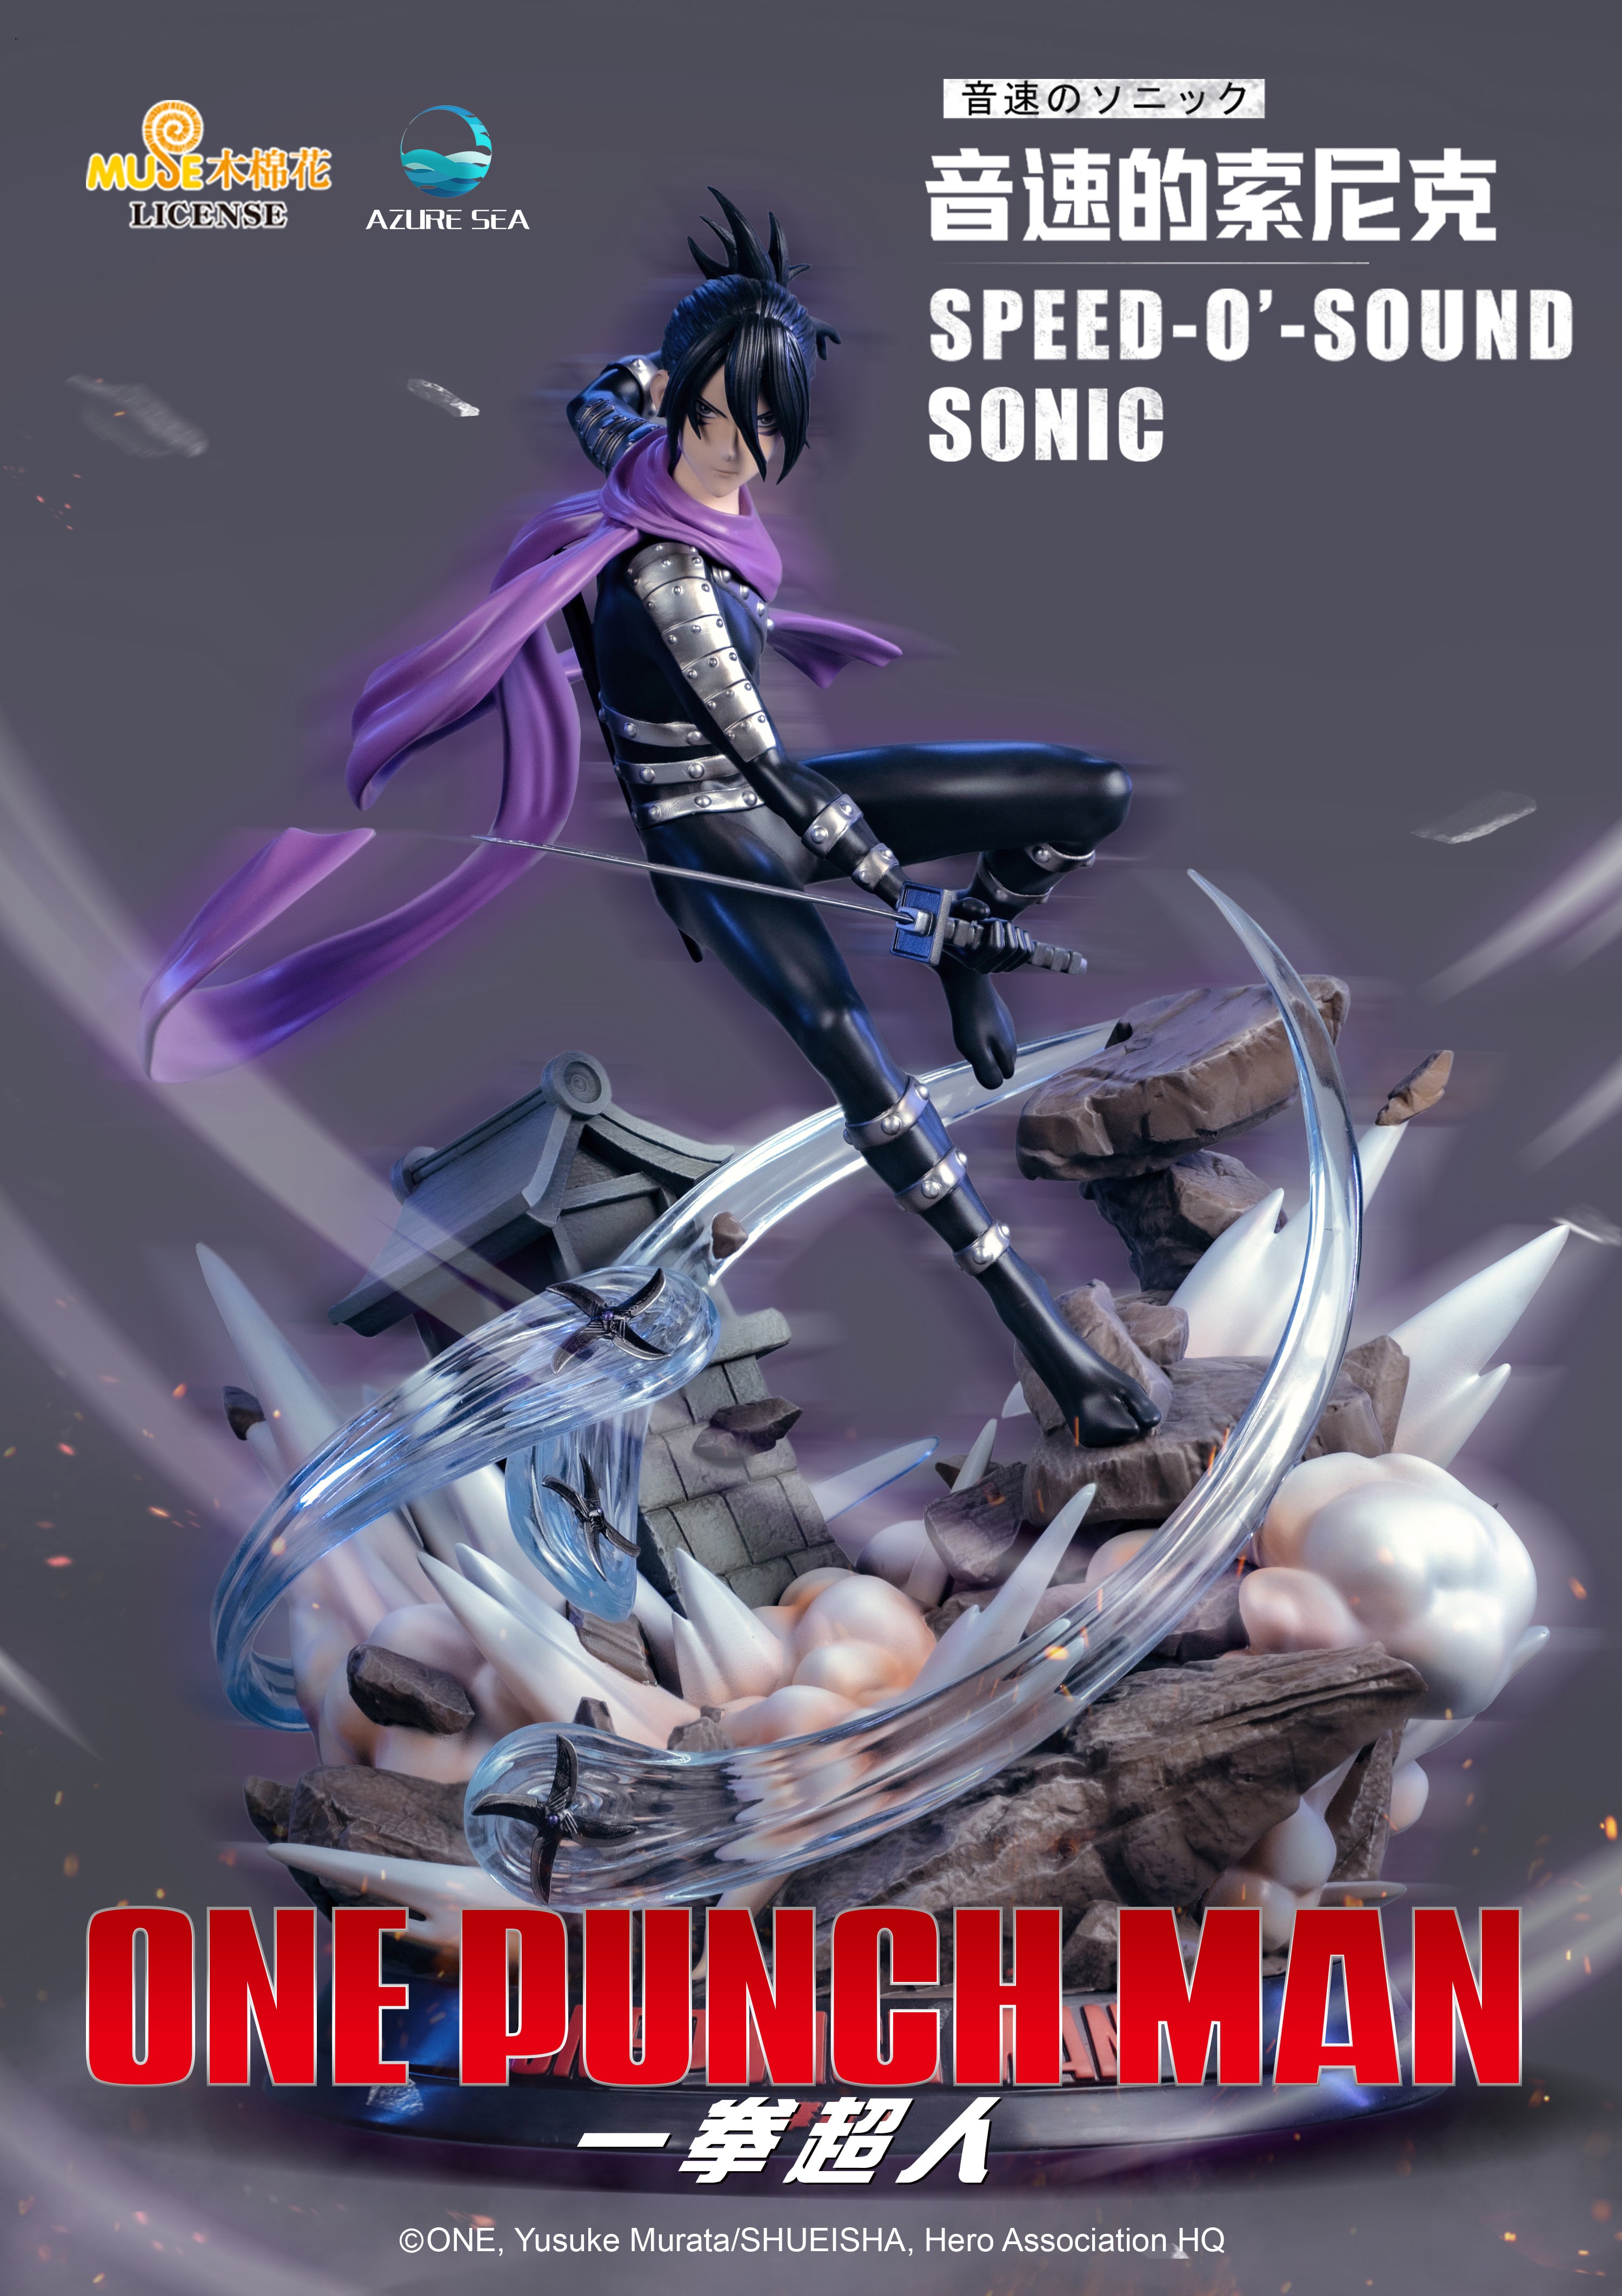 AZURESEA STUDIO – ONE PUNCH MAN: SPEED-O'-SOUND SONIC 1/6 (LICENSED) [ – FF  COLLECTIBLES